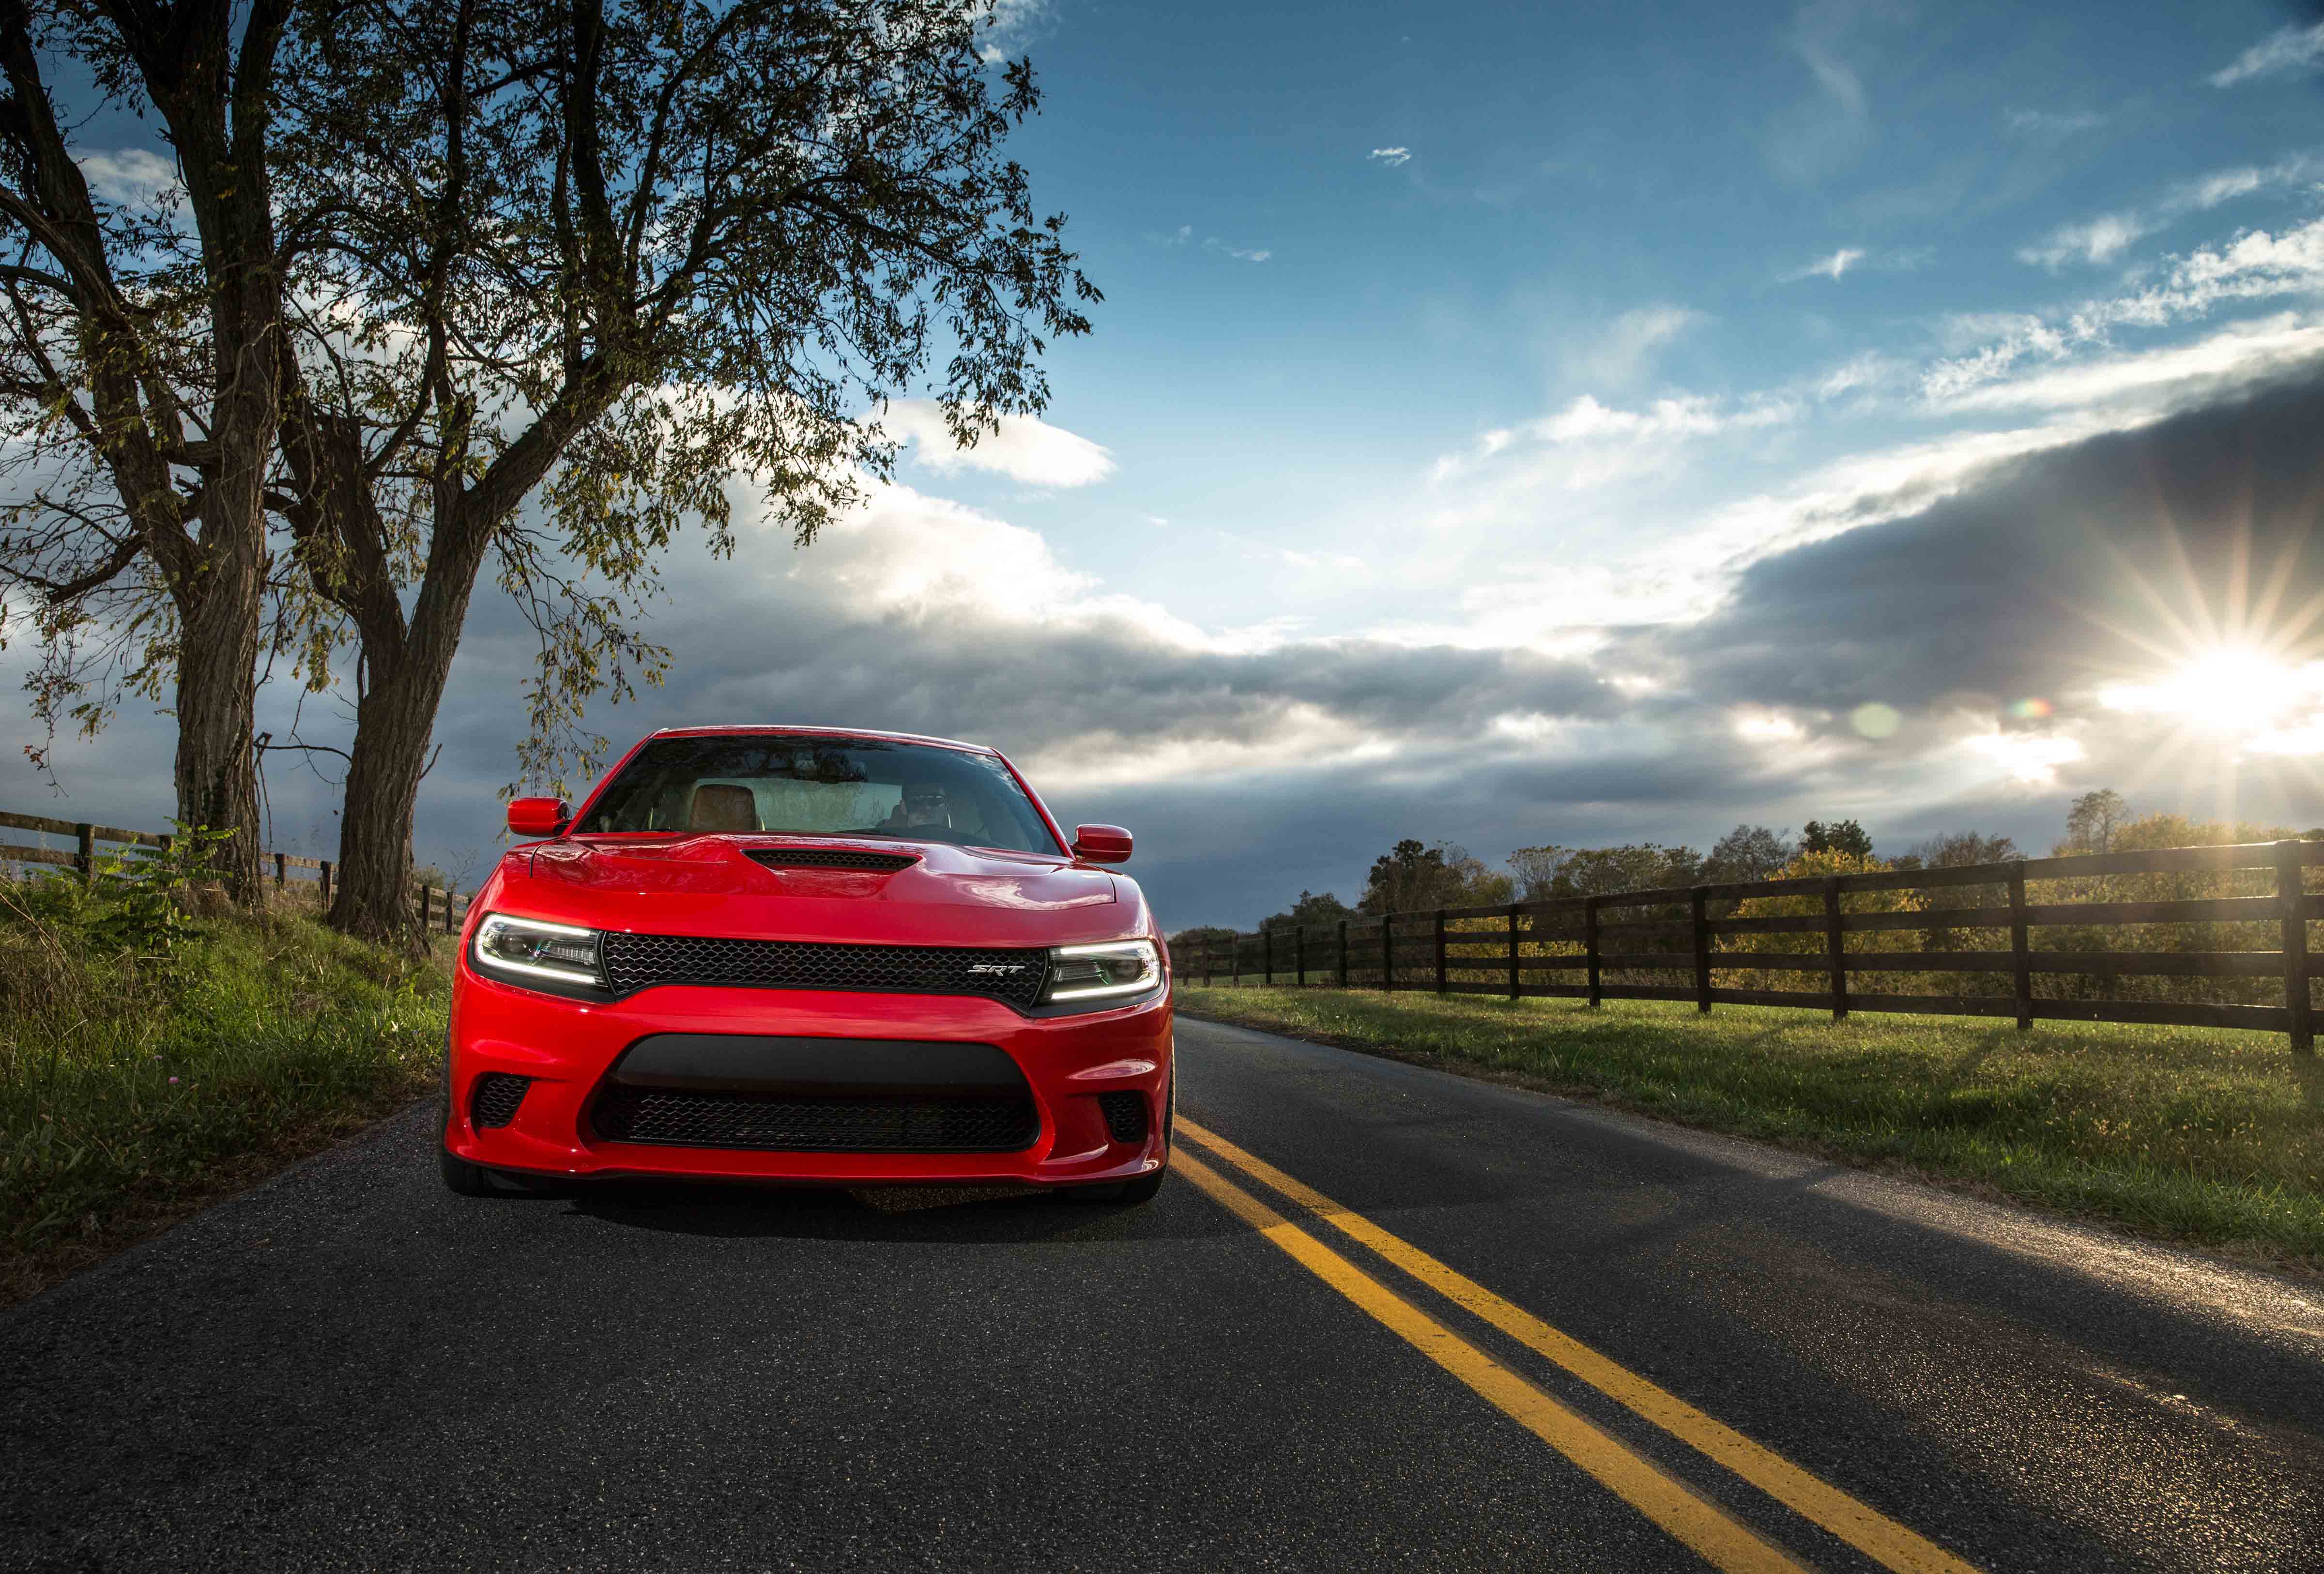 New Dodge available in Stillwater, MN at Fury Motors Stillwater